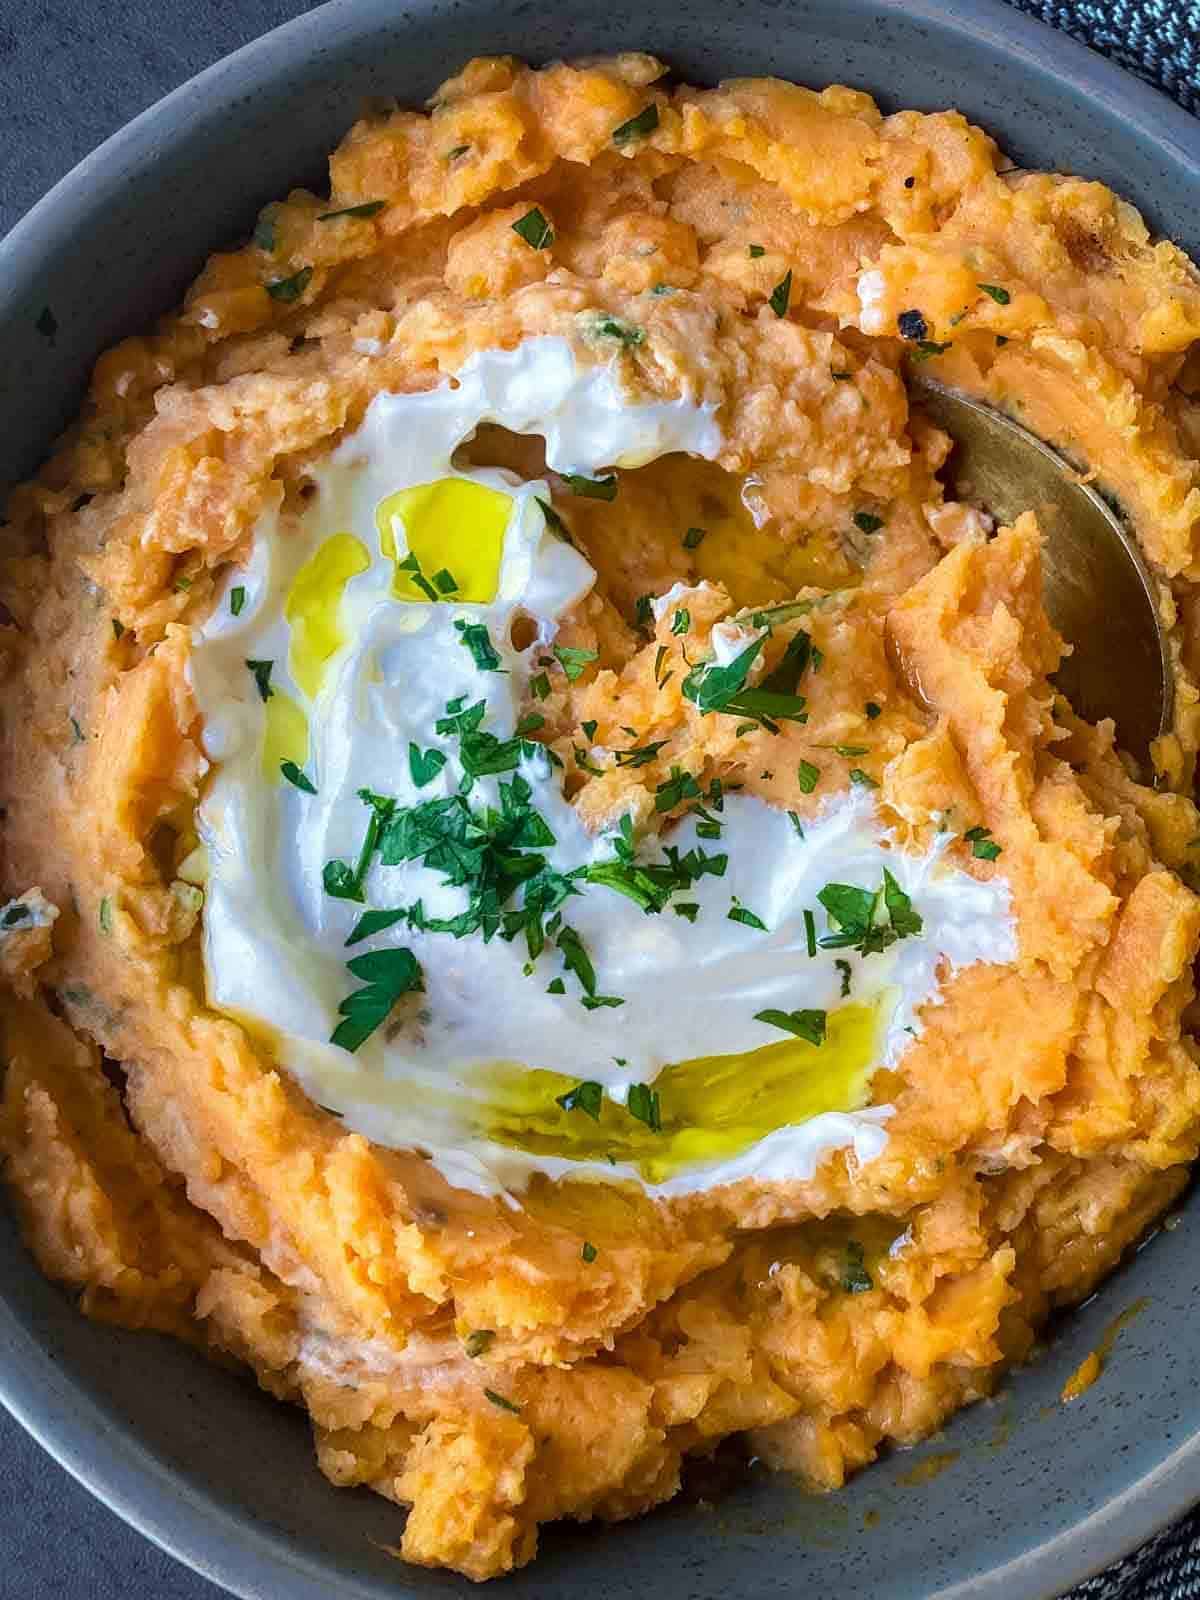 mashed sweet potato in a grey bowl with a serving spoon